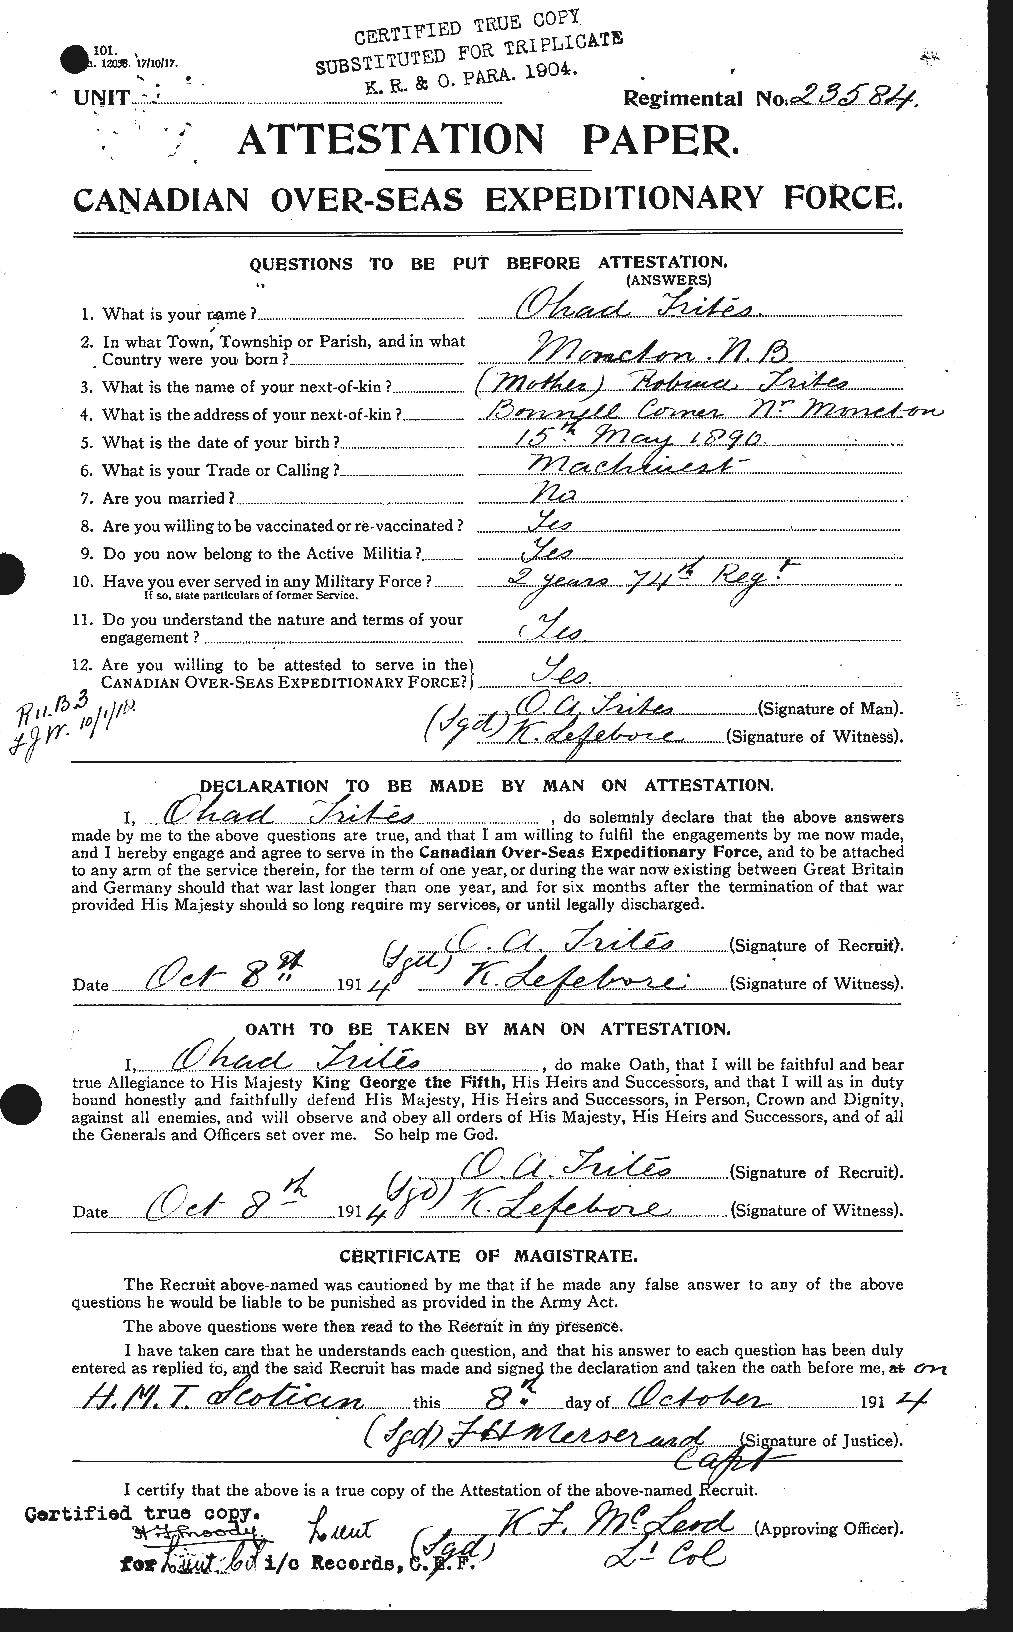 Personnel Records of the First World War - CEF 640158a